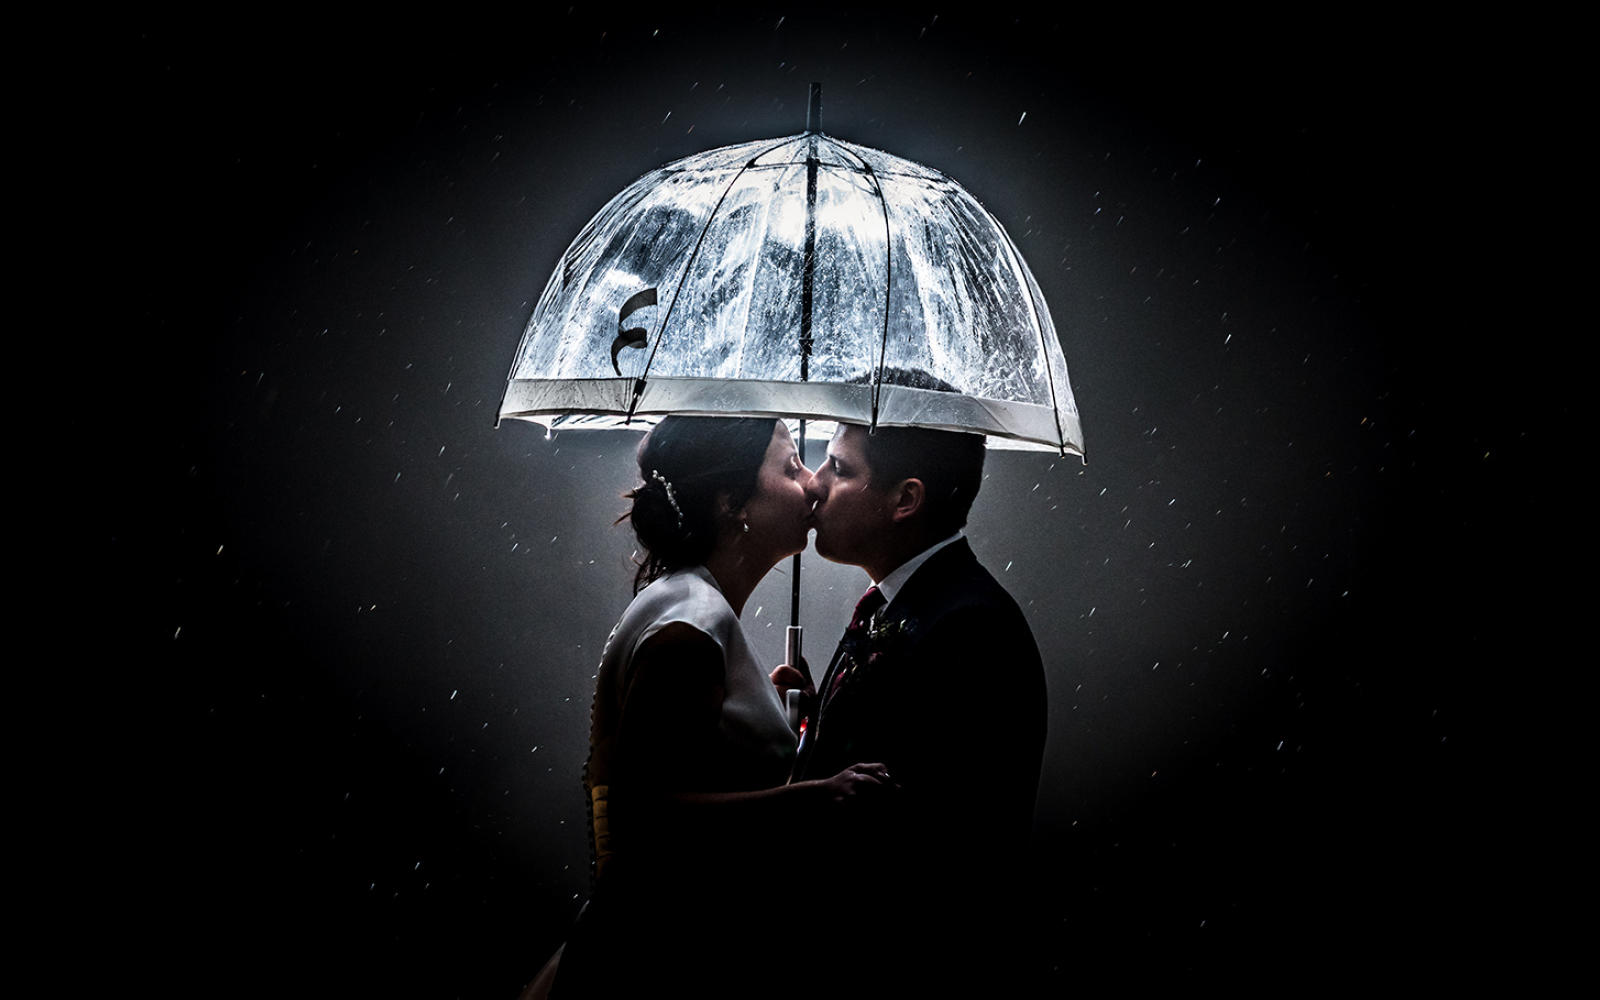 Capture Every Moment wedding photography duo from Cirencester reportage traditional photographers Lapstone Barn Chipping Campden Cotswolds venue Bride Groom kiss under an umbrrella under the stars